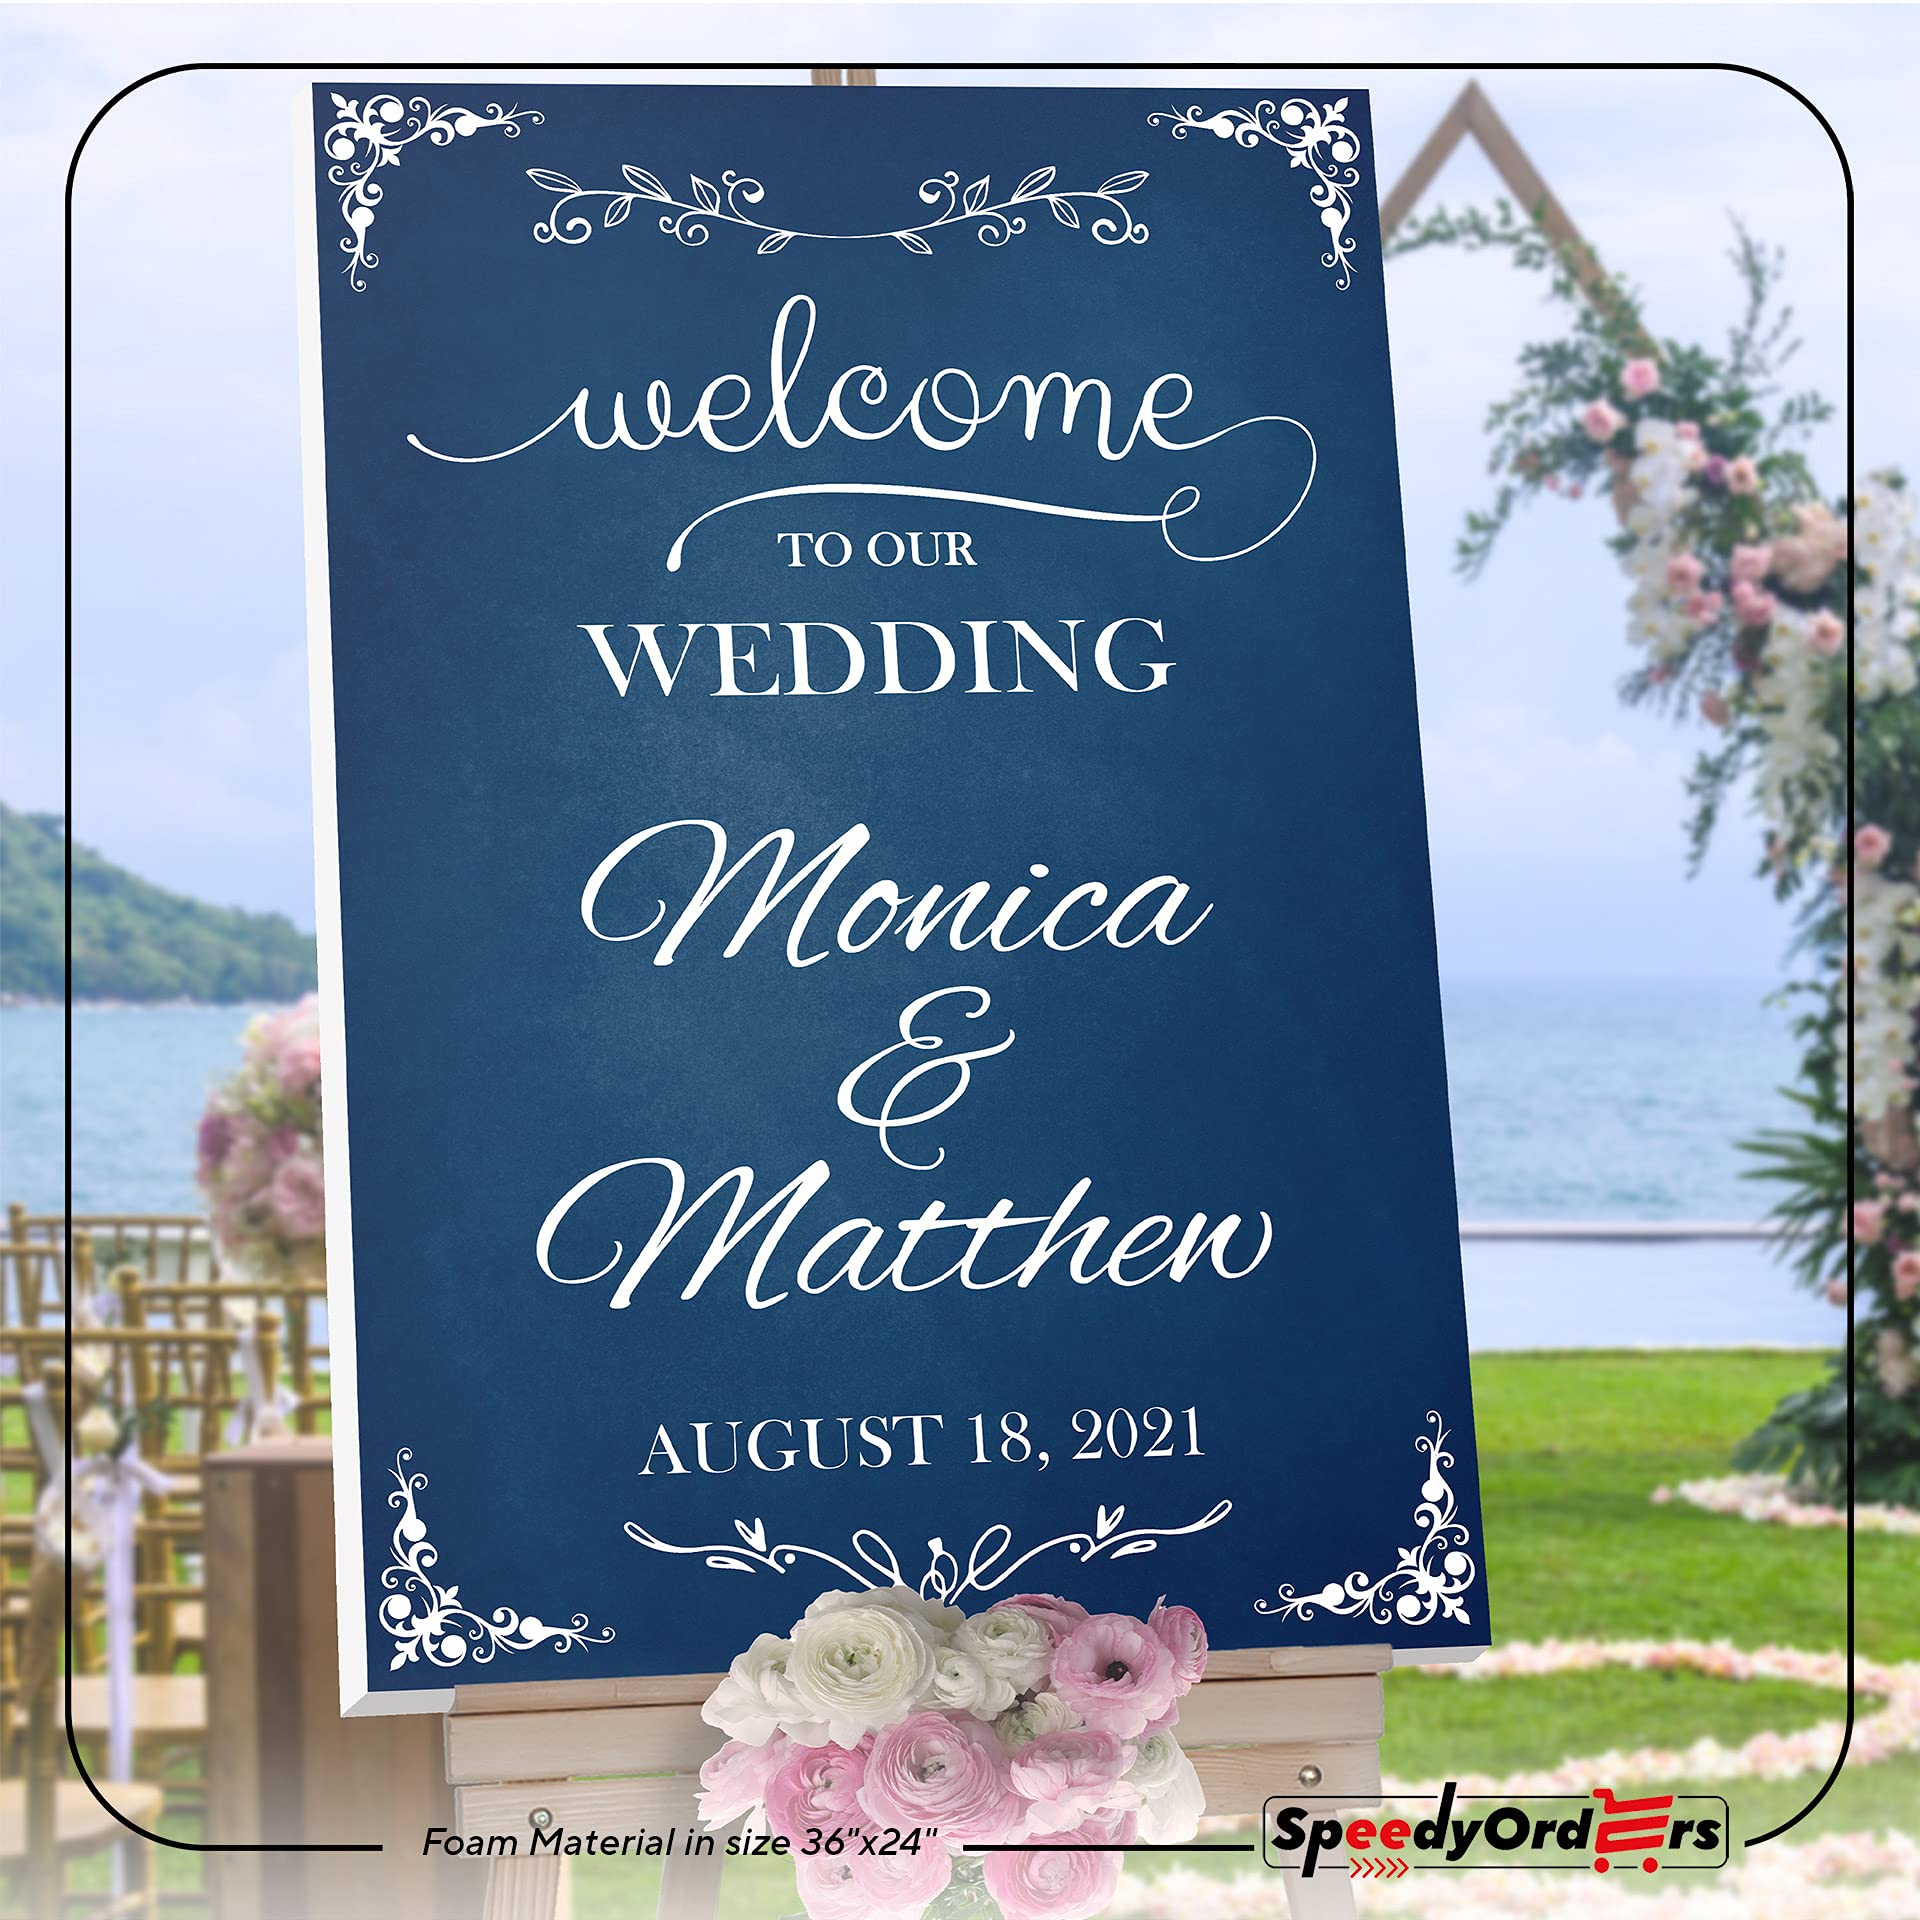 Welcome to Our Wedding, Custom Wedding Sign, Wedding Welcome Sign, Chalkboard Sign, Wedding Party Signs, Handmade Party Supply, Custom Banner and Sign